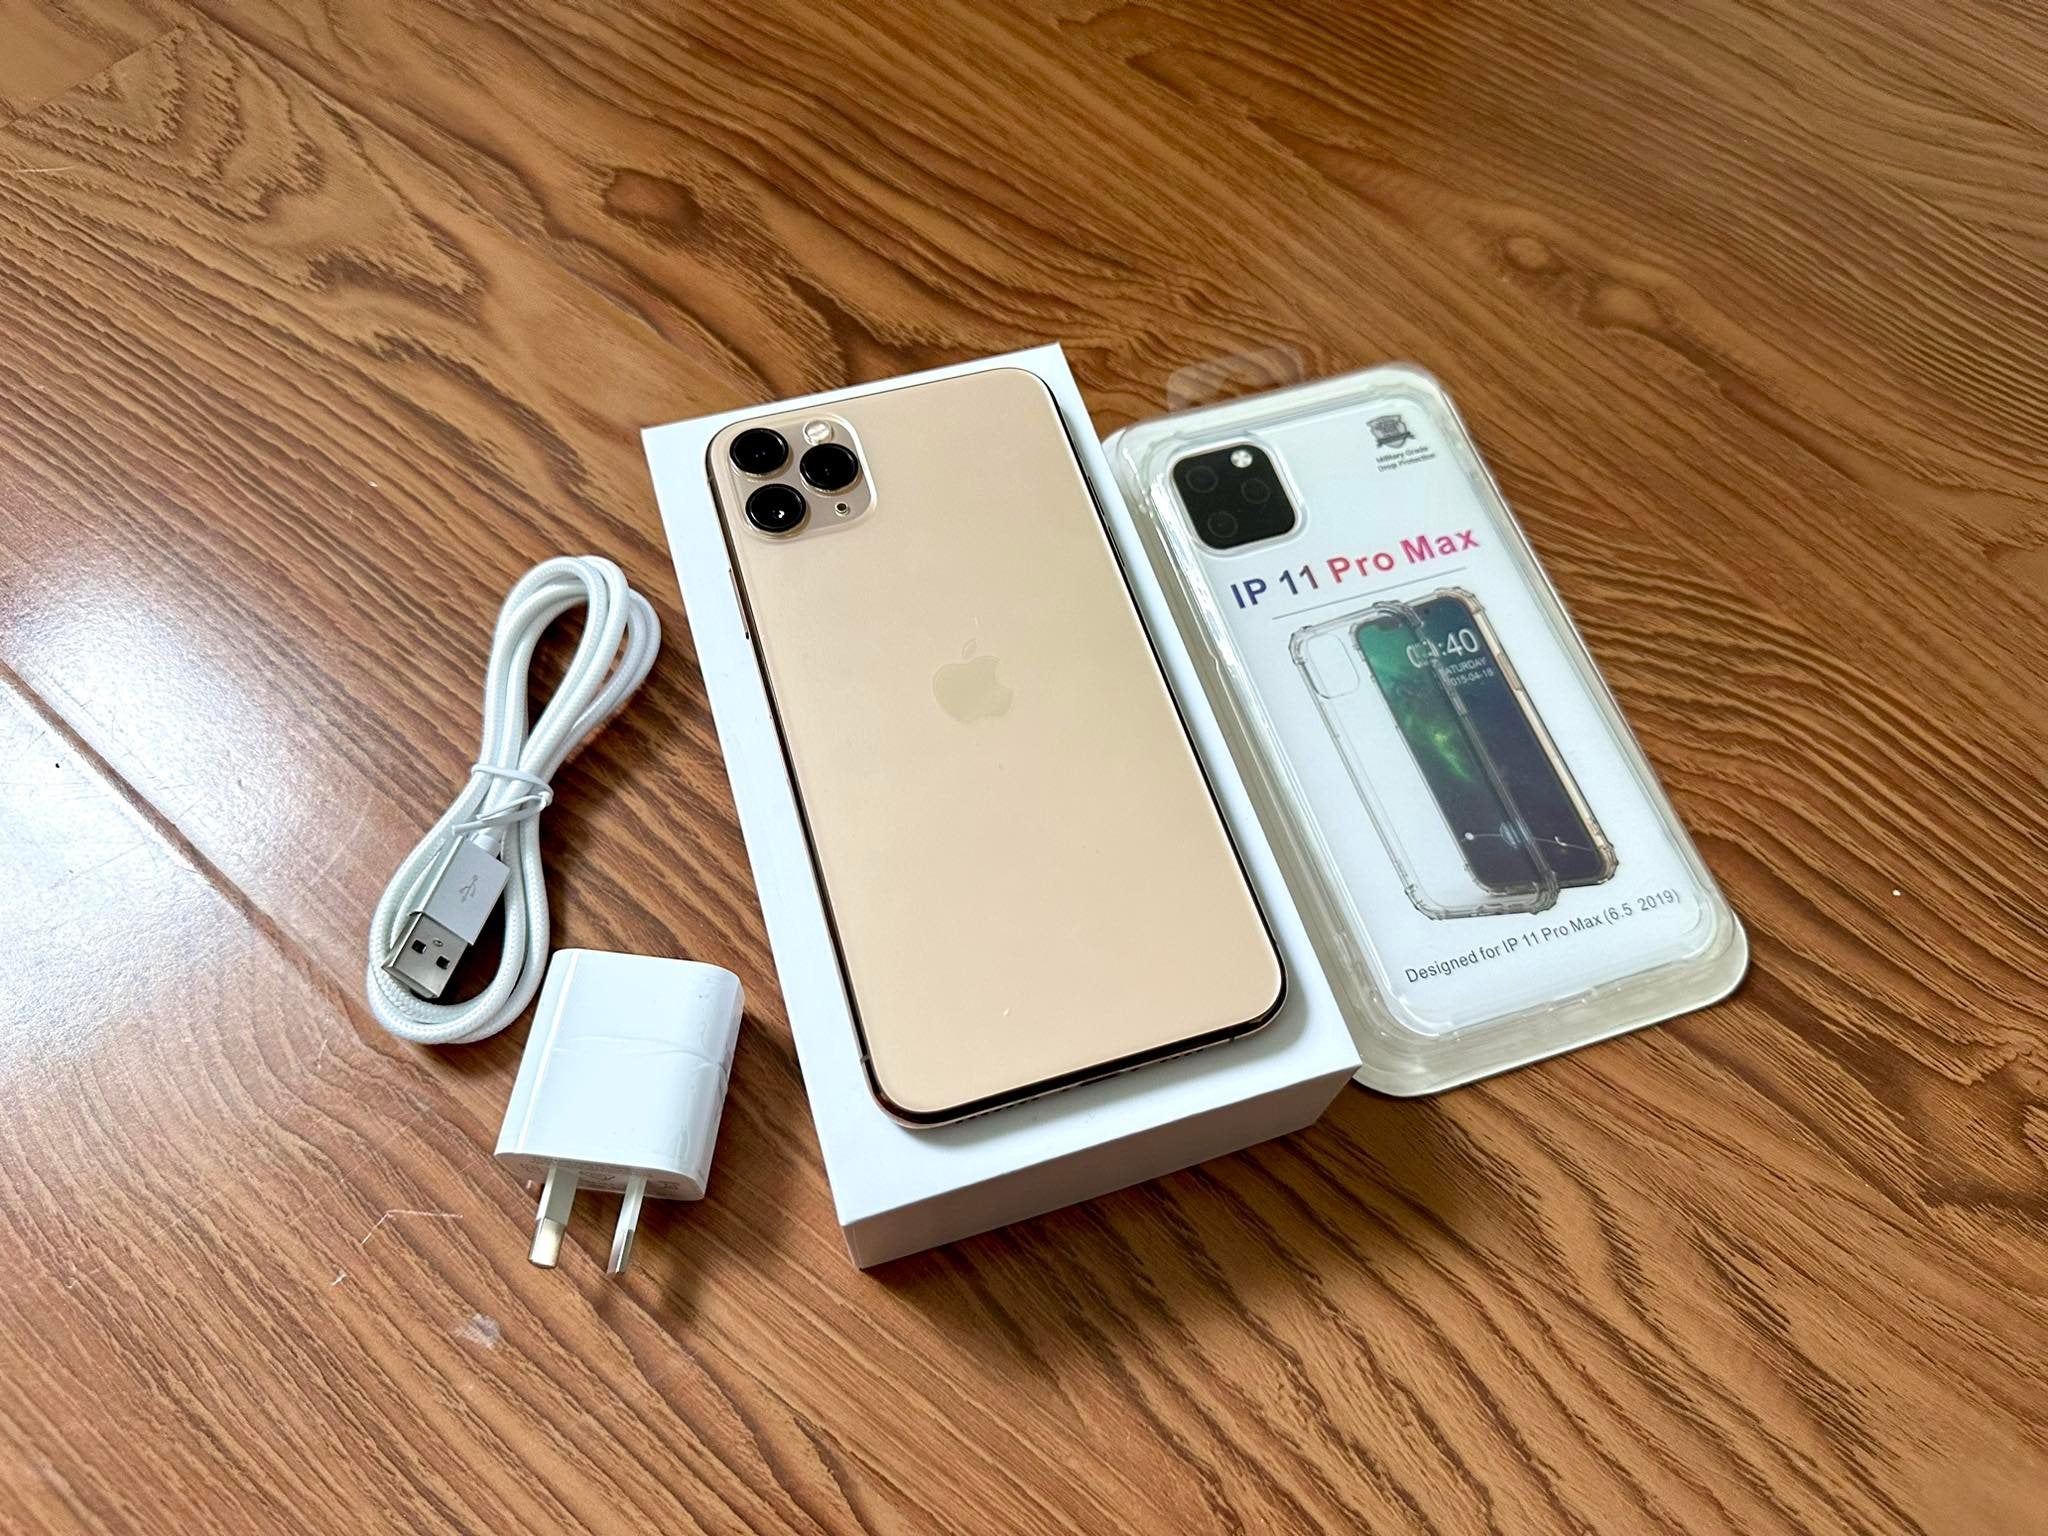 Apple iPhone 11 Pro Max 64GB Gold (As New) With Case, Screen Protector & Shipping